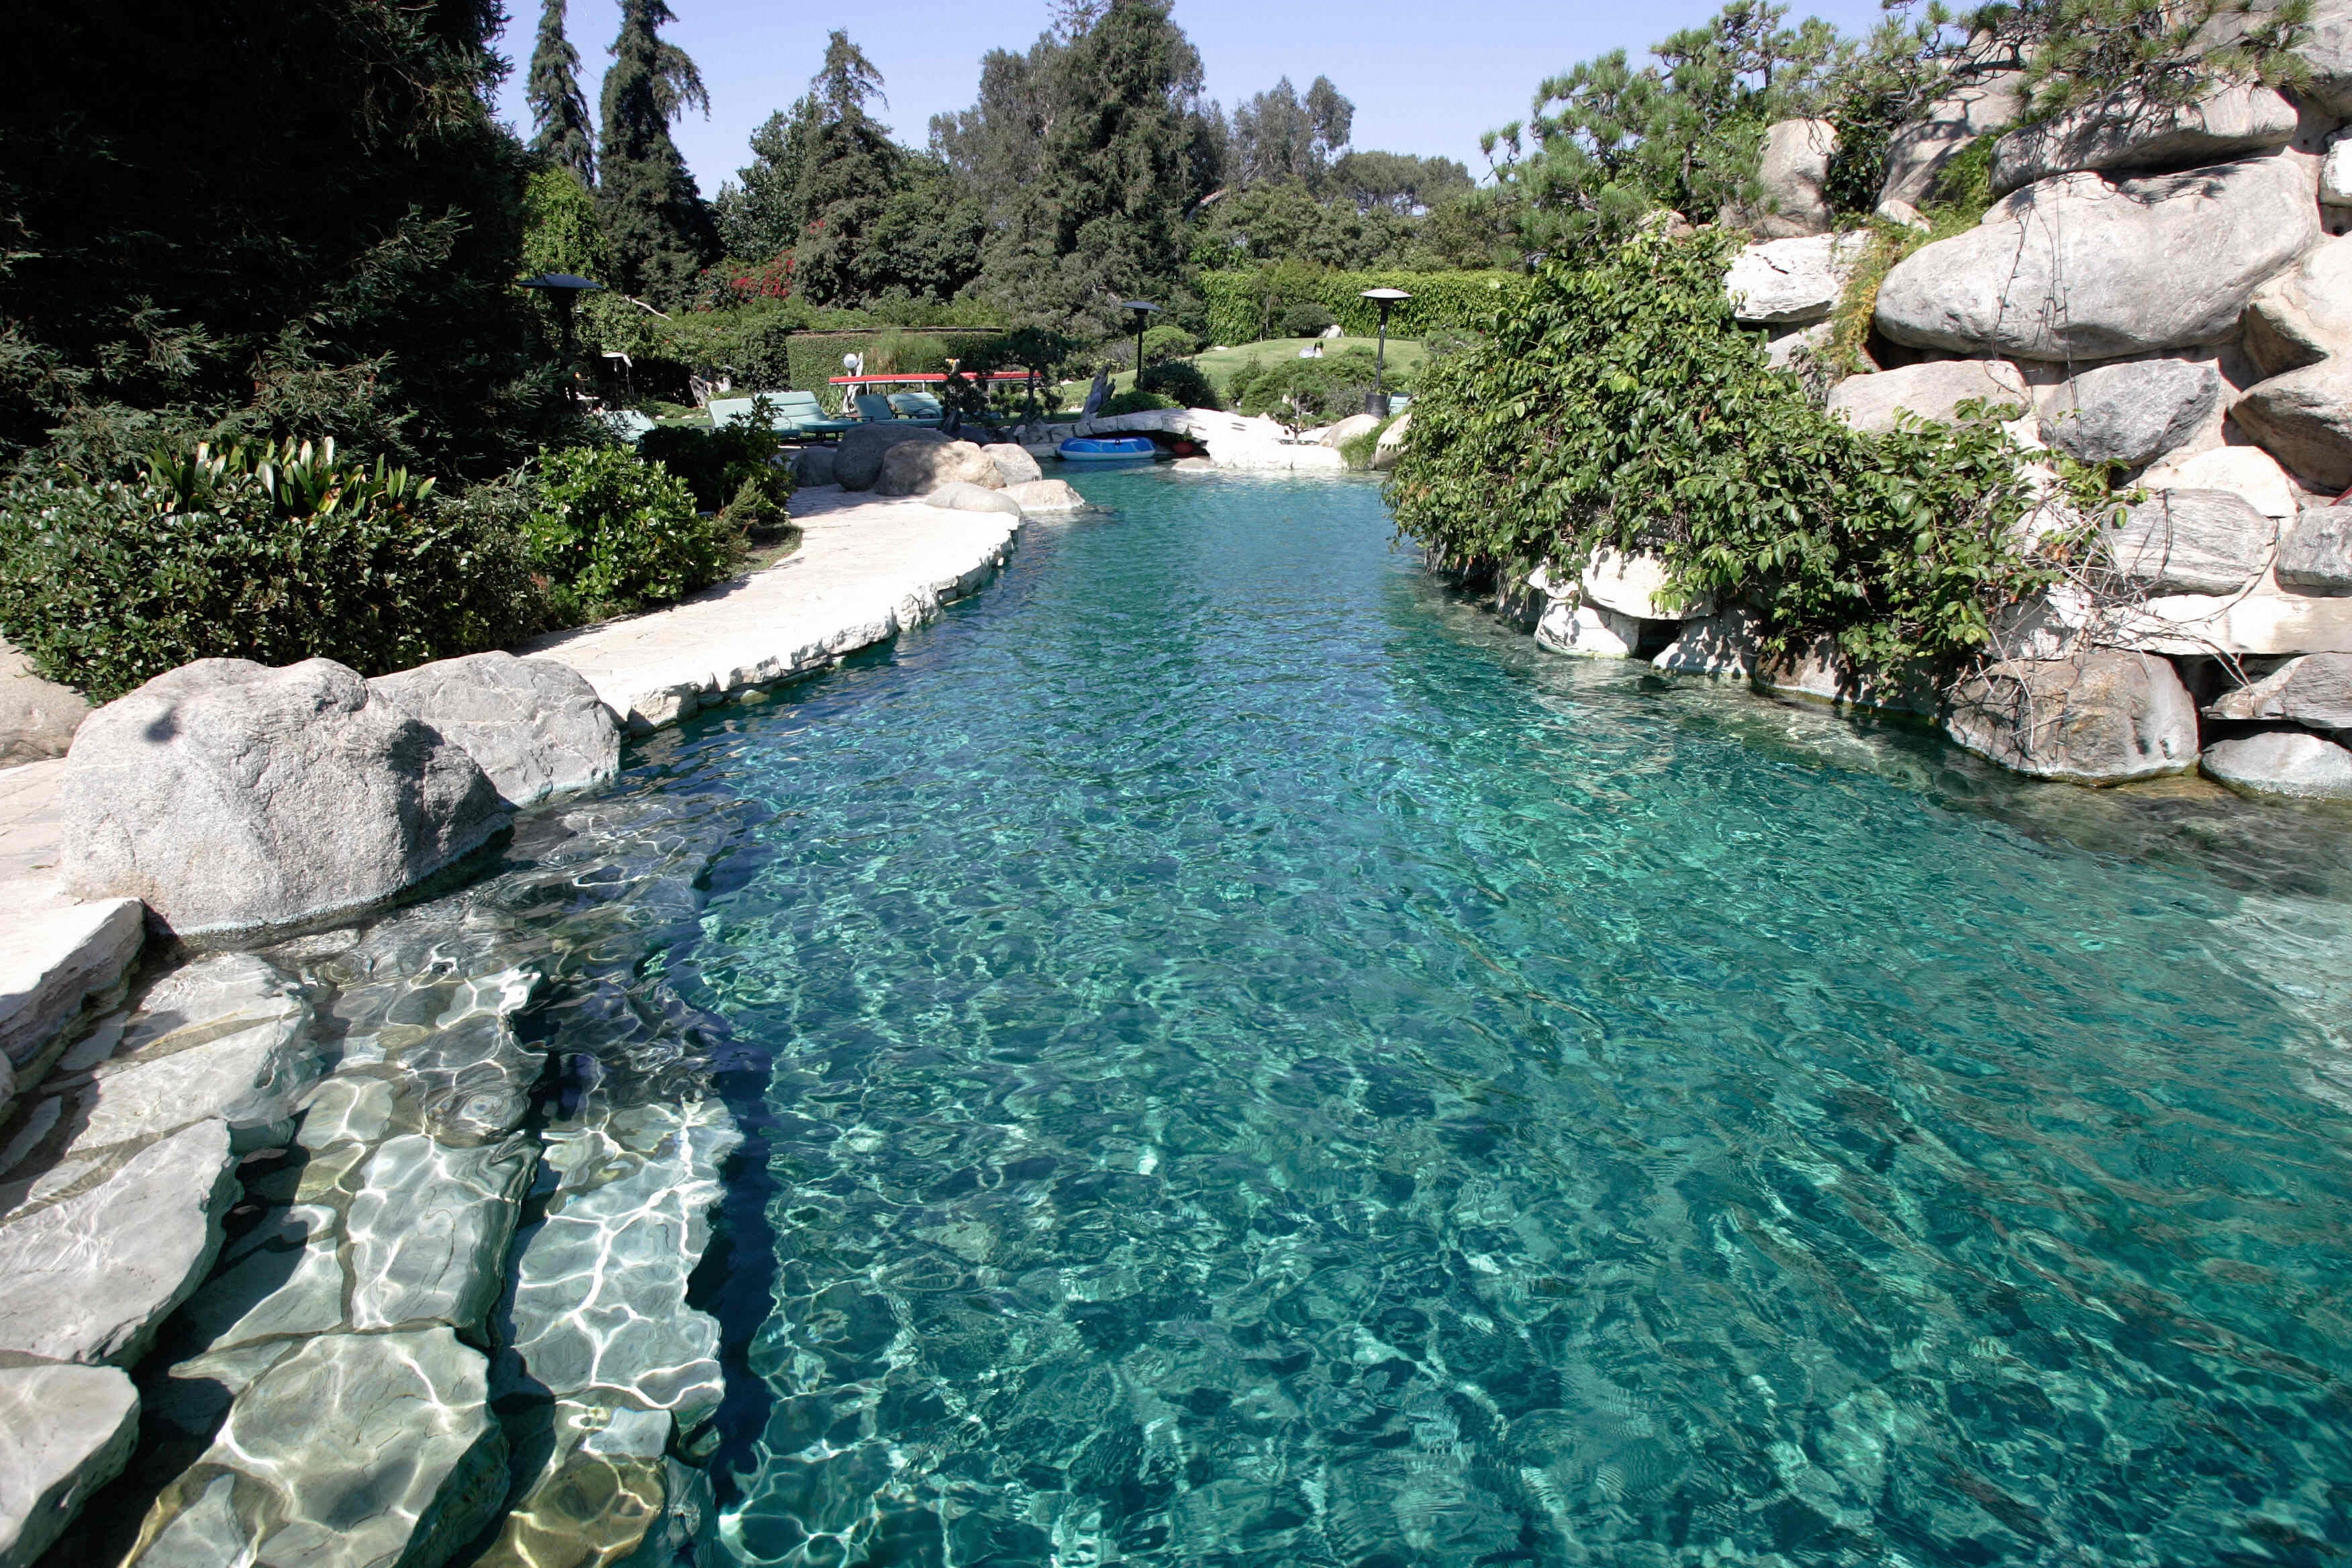 The swimming pool of the Playboy mansion in 2006